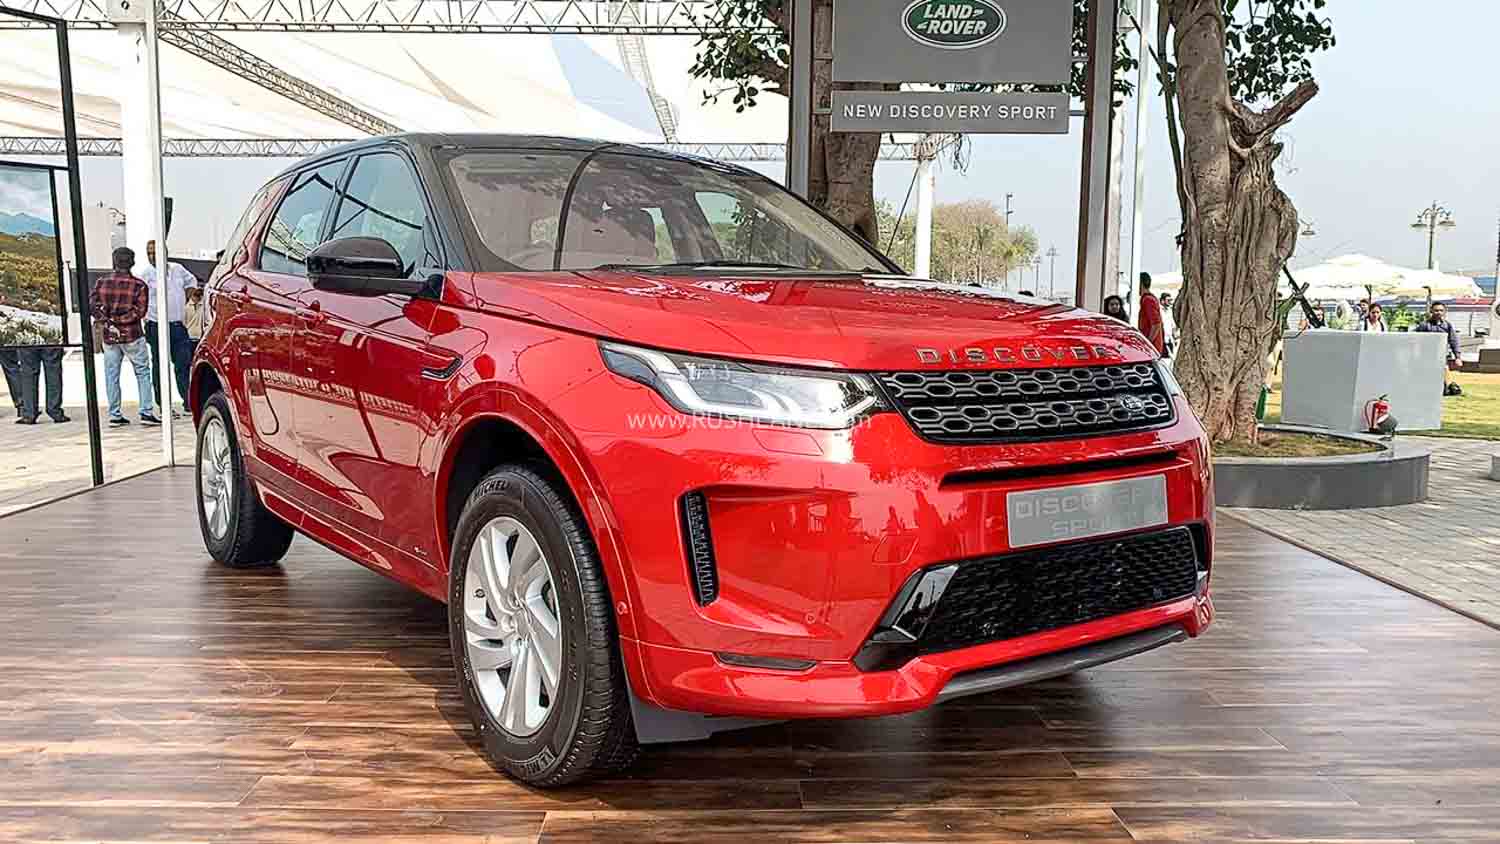 2020 Land Rover Discovery Sport Facelift Launch Price Rs 57 lakh